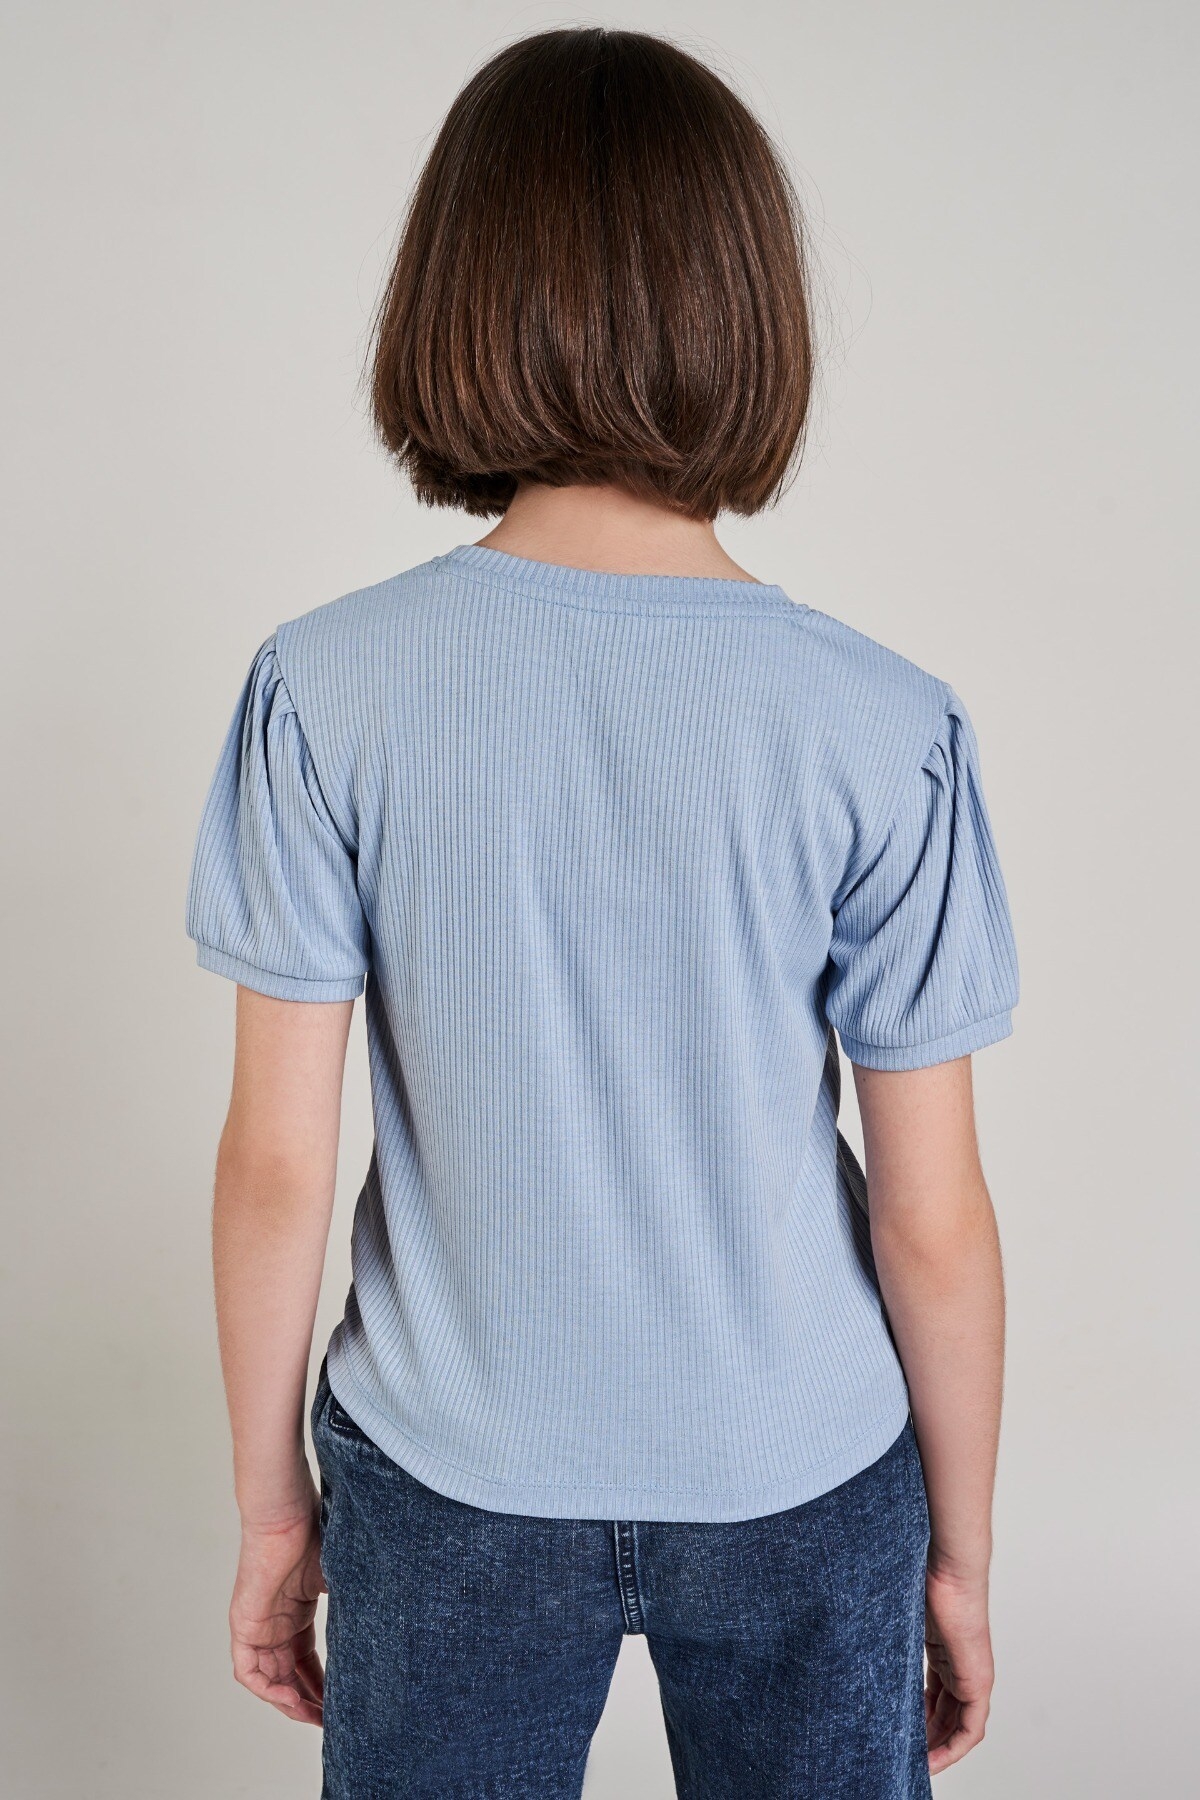 AND | Powder Blue Solid A-Line Top 2